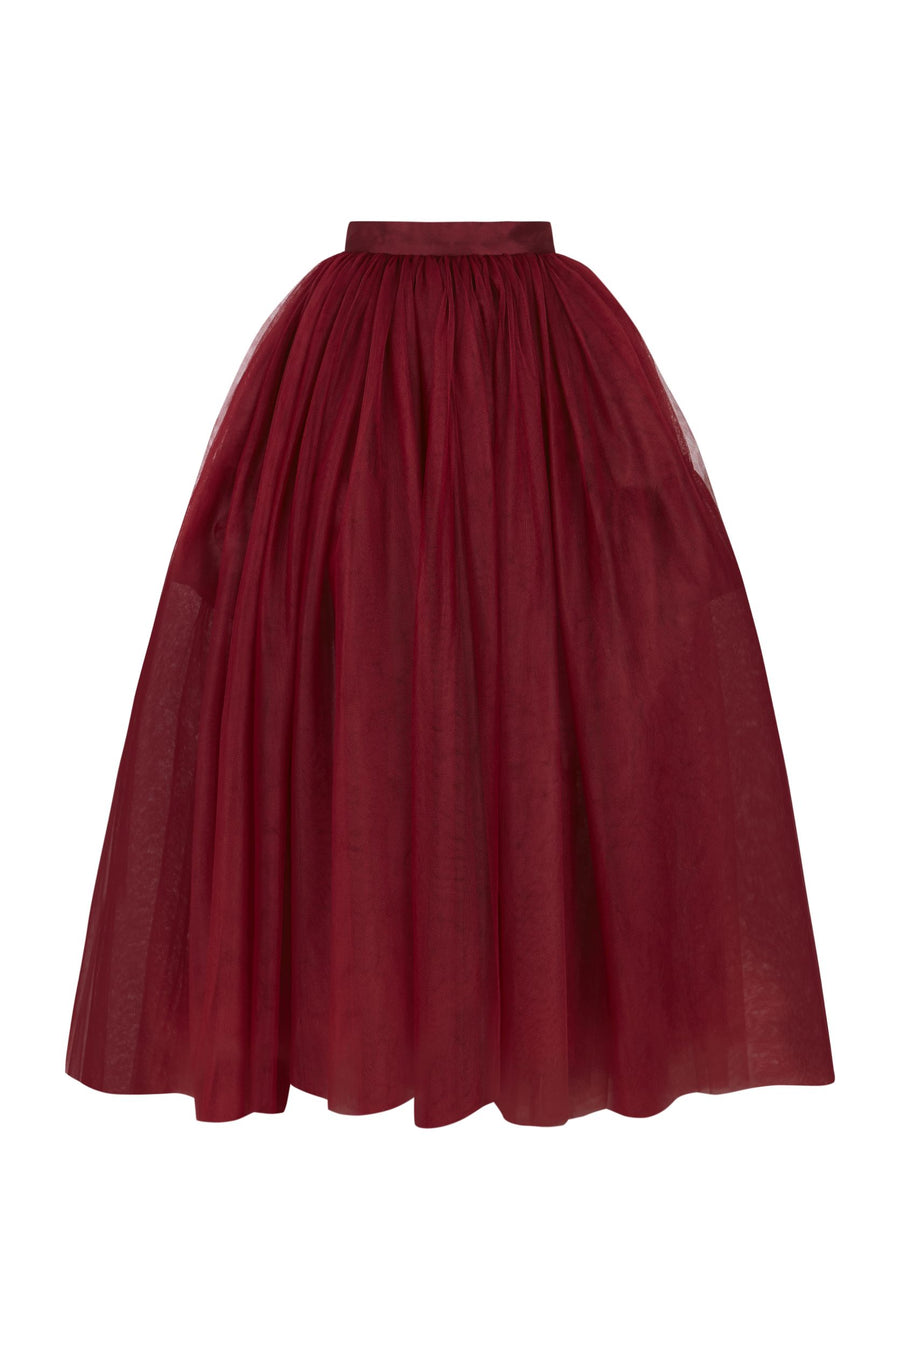 THE 2ND SKIN MIDI LENGTH TULLE SKIRT. Available in two colours - Bordeaux and Black